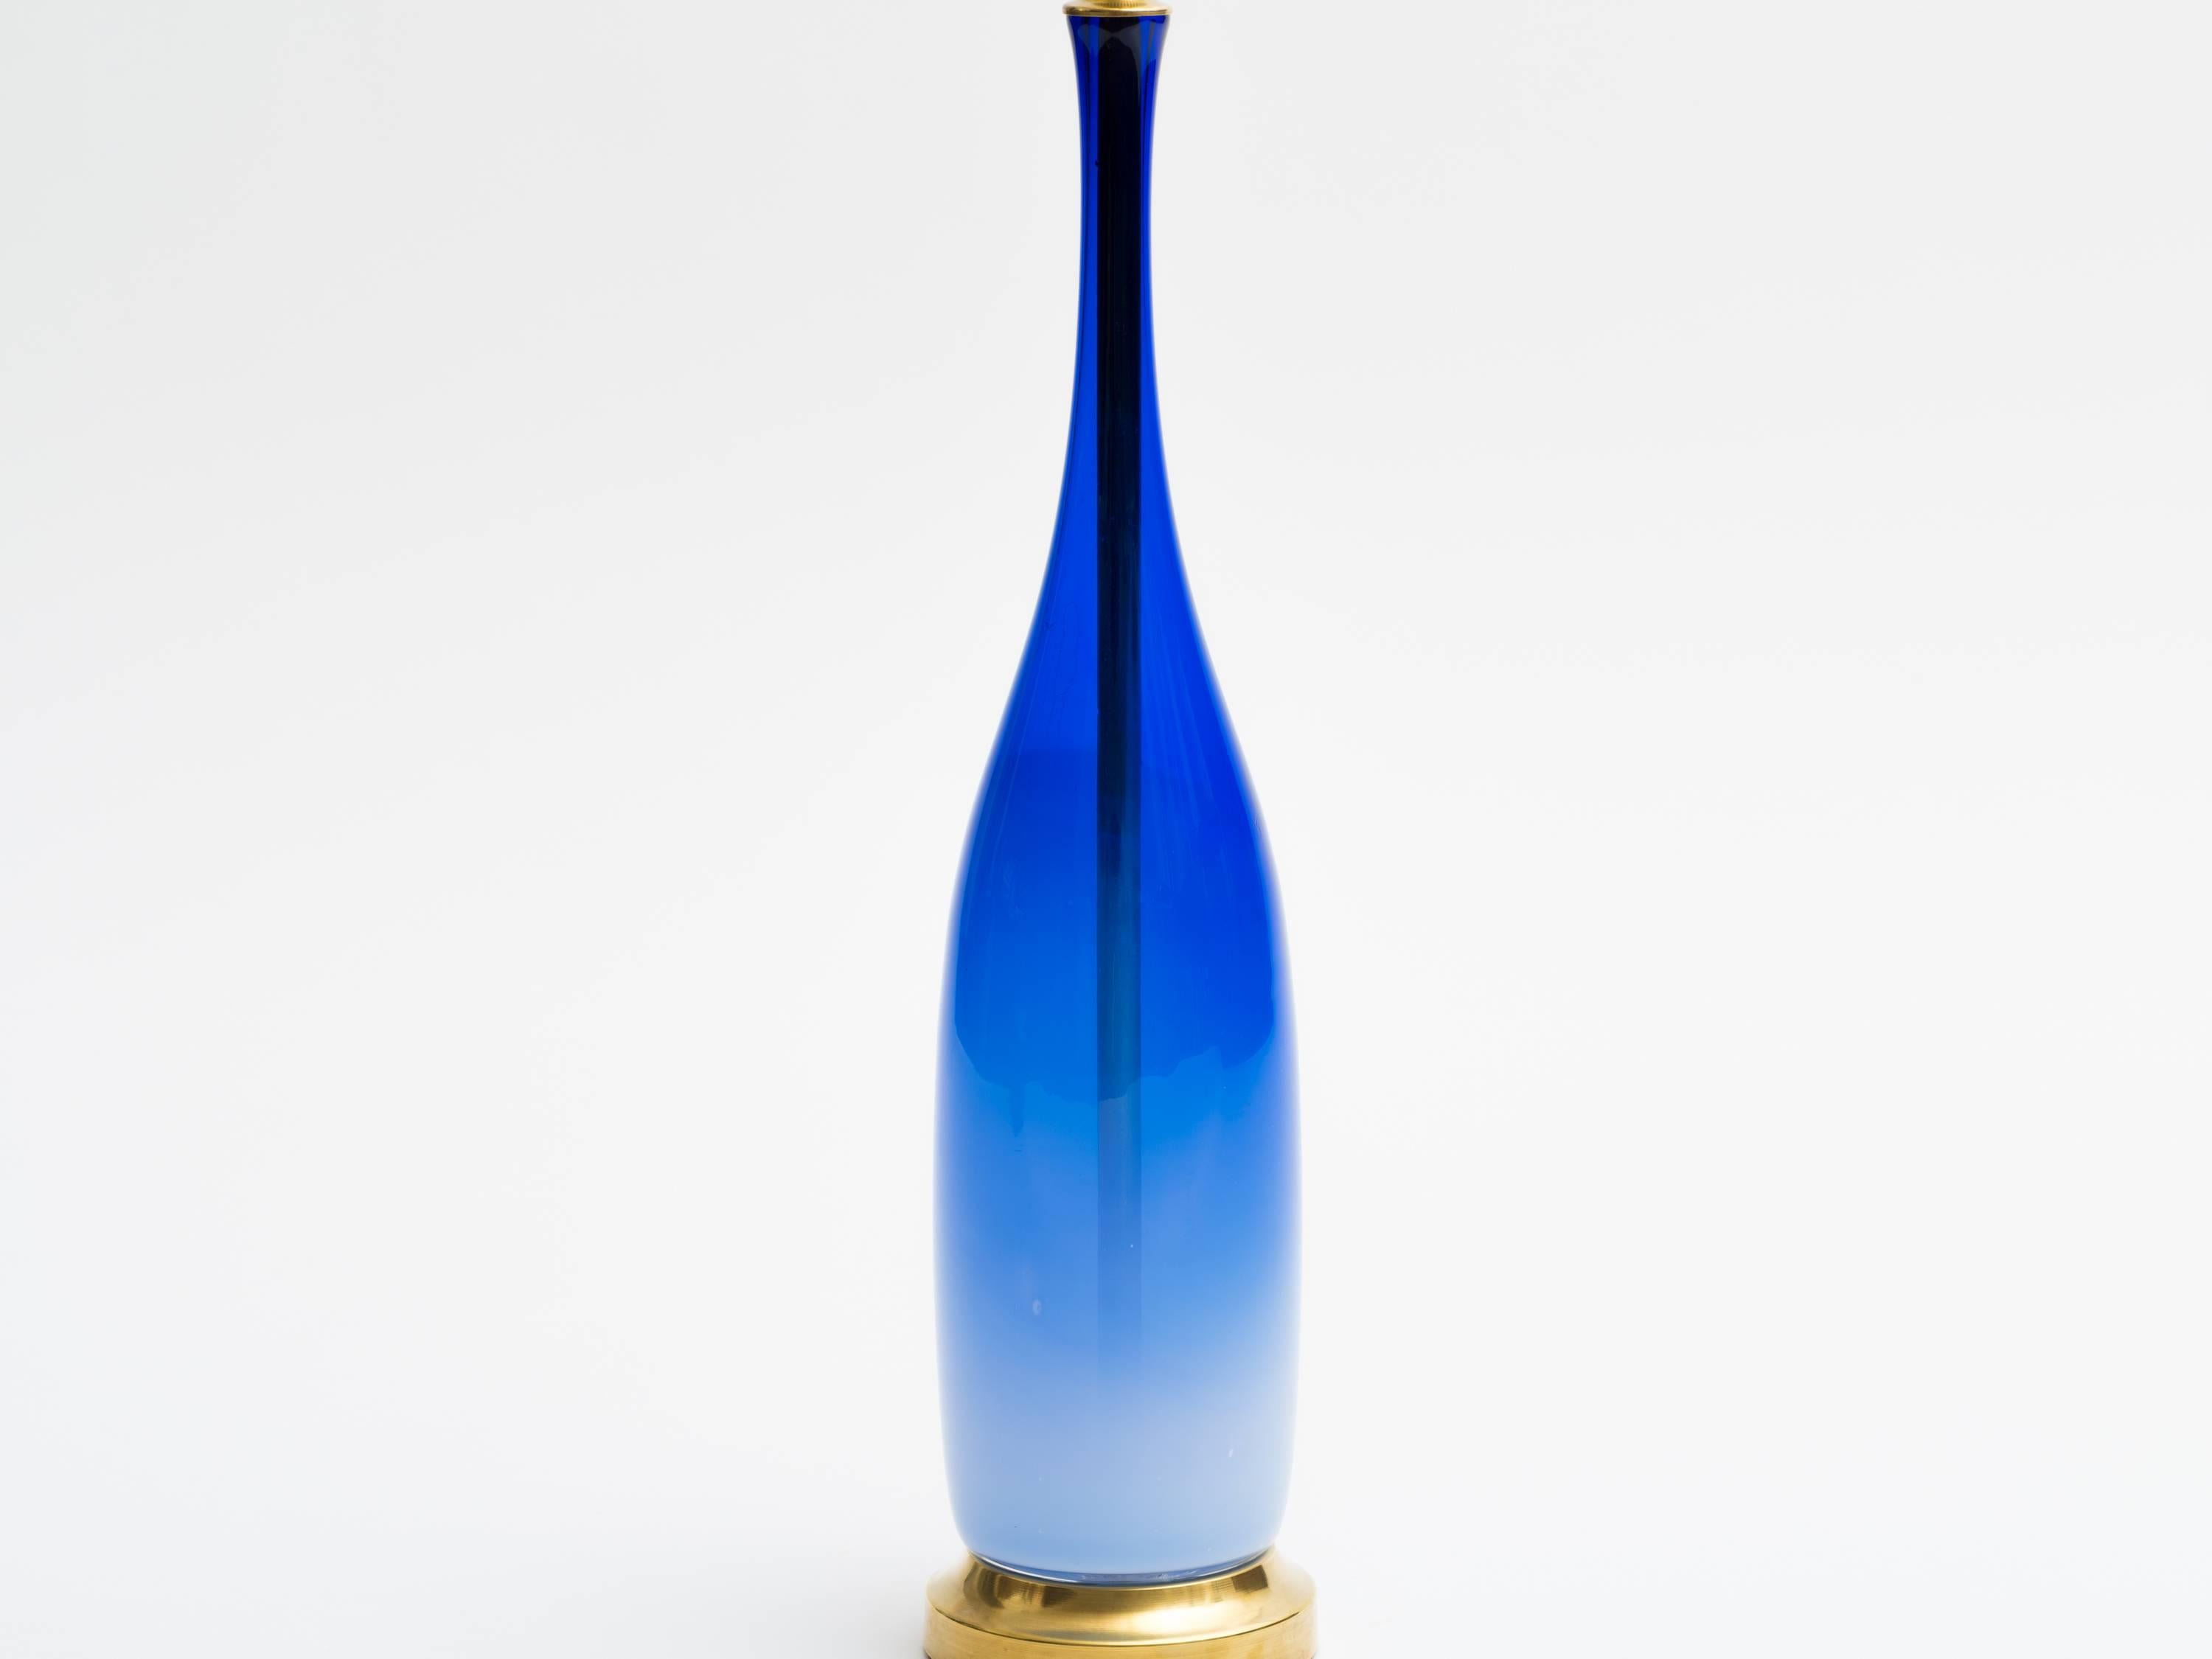 Leerdam Unica blue ombre glass bottle form lamp by glass master Floris Meydam, Netherlands, circa 1950s. Original brass lamp base. Rewired with new solid brass lamp hardware.